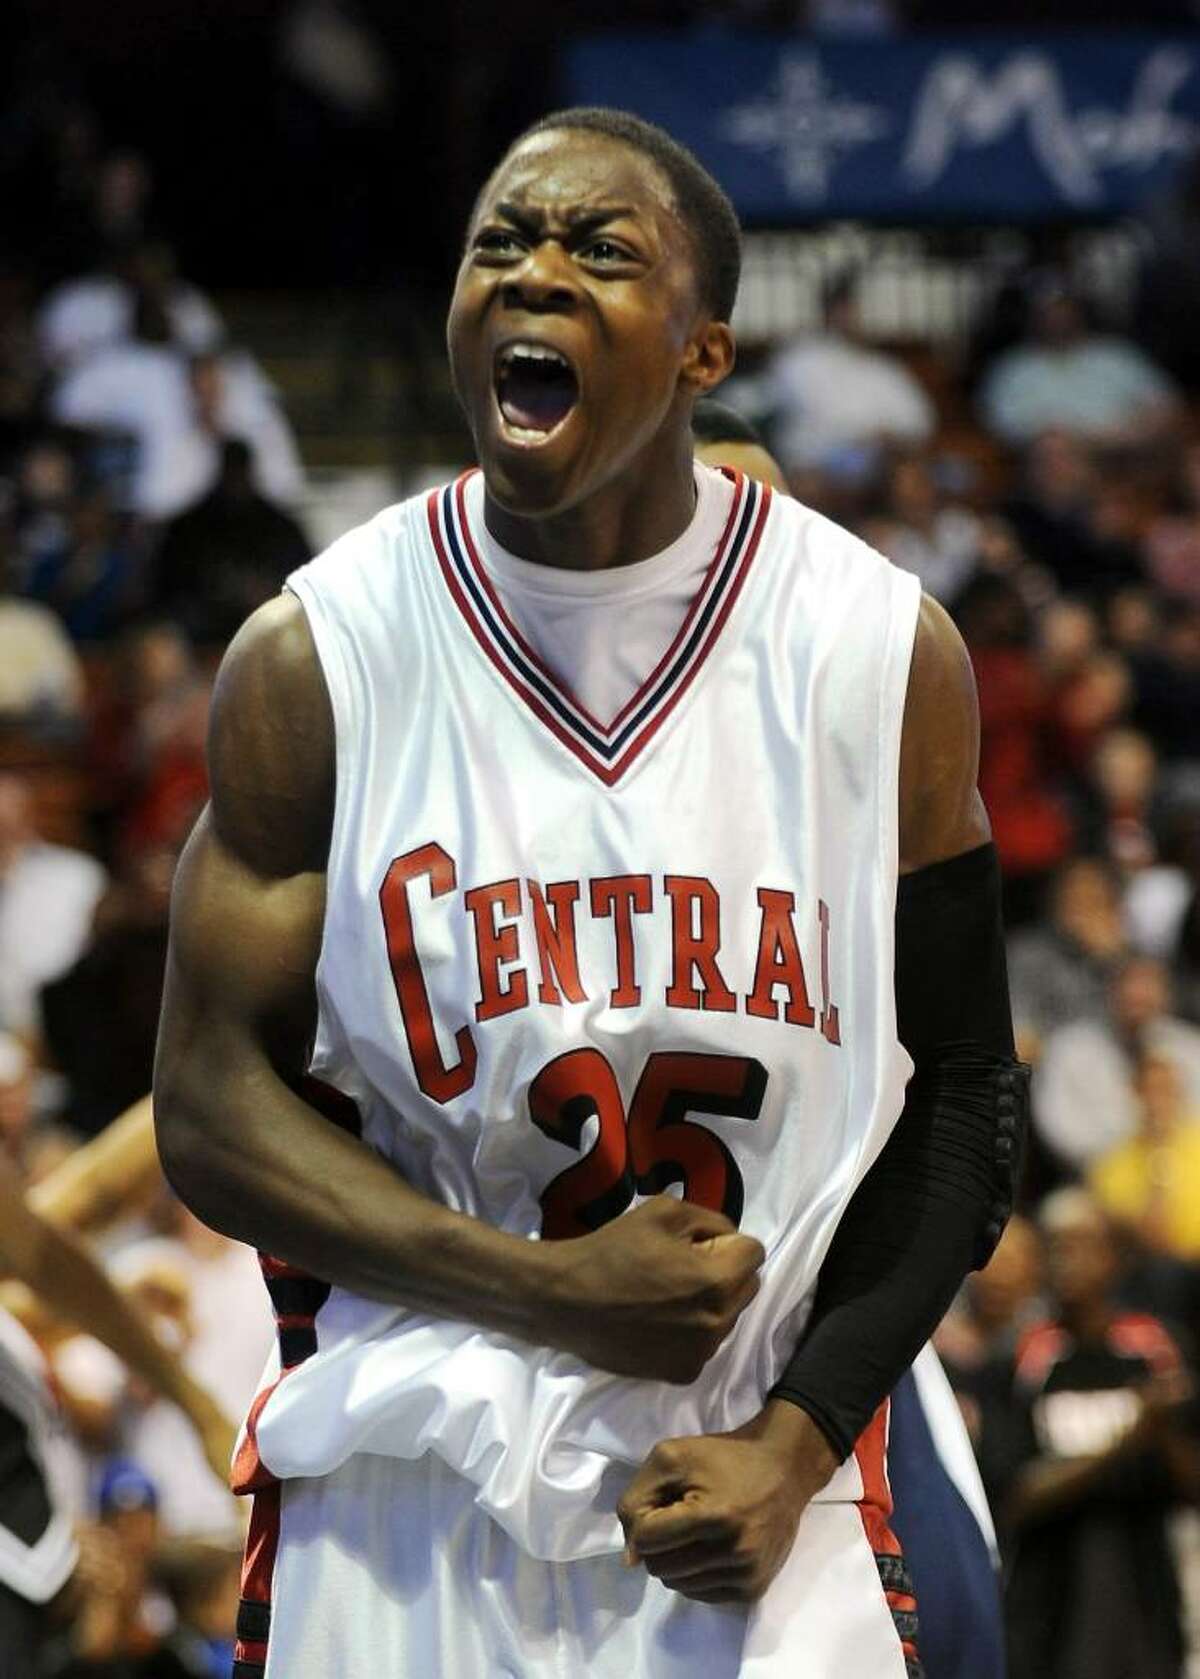 Central's #25 Diontay Washington reacts after being fouled, during Class L state championship action against Hillhouse at Mohegan Sun Arena in Uncasville, Conn. on Saturday Mar. 20, 2010.